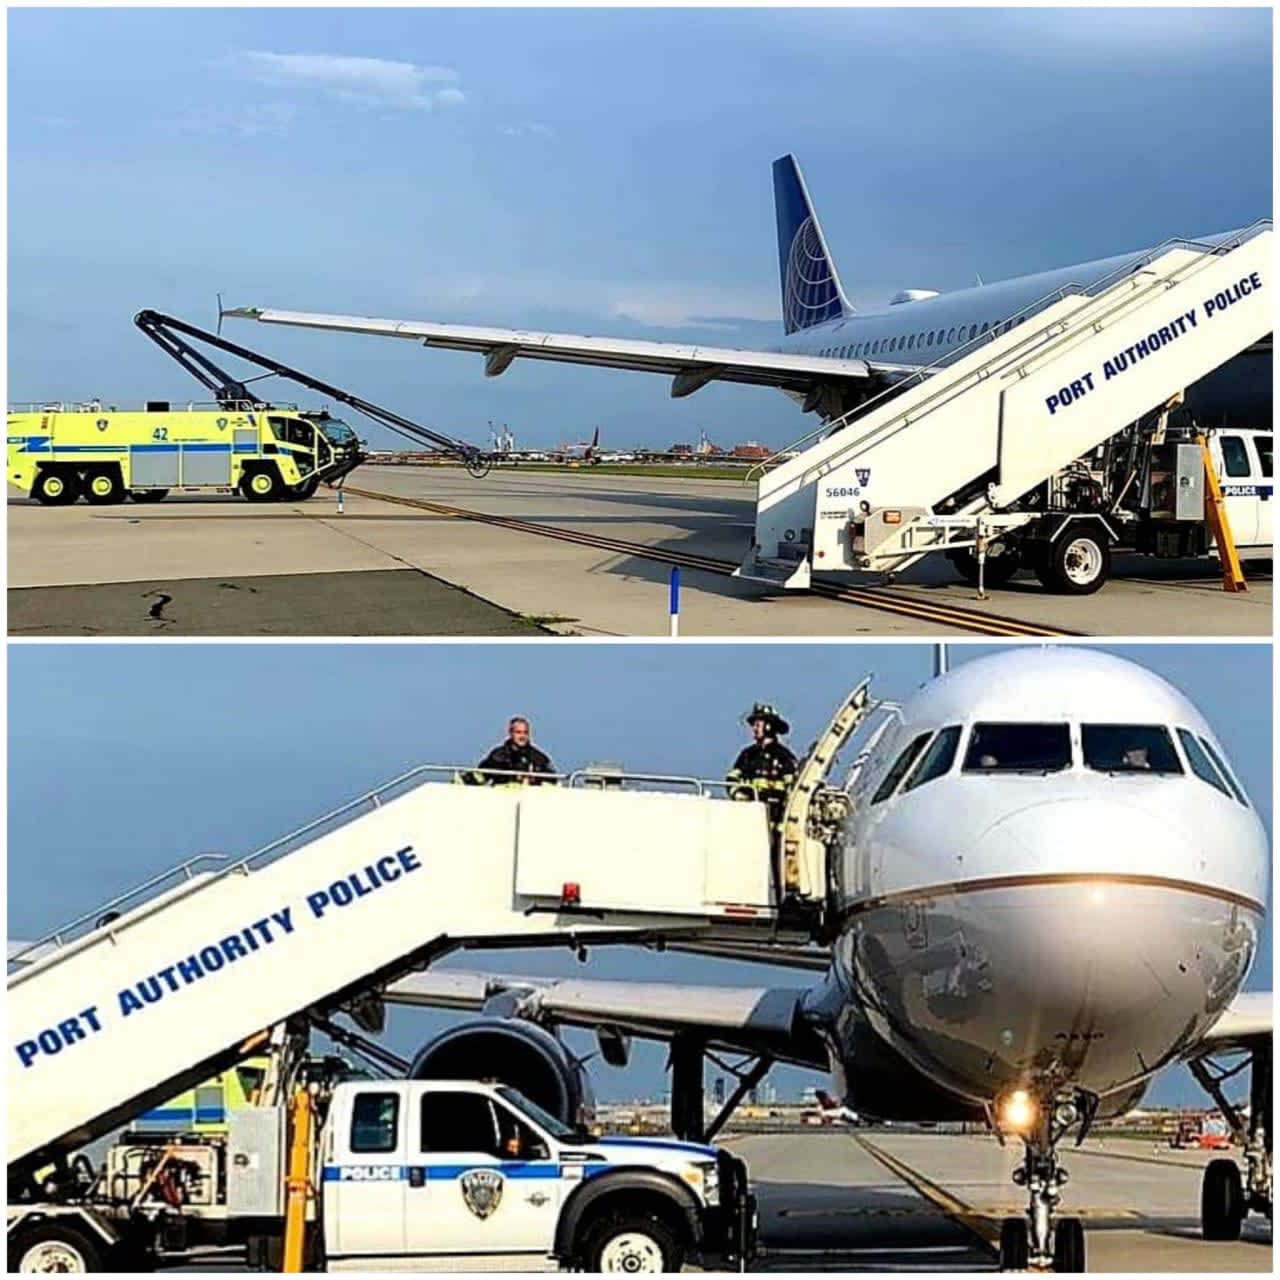 Port Authority police help passengers off a plane after it began leaking fuel during takeoff Monday at Newark airport.